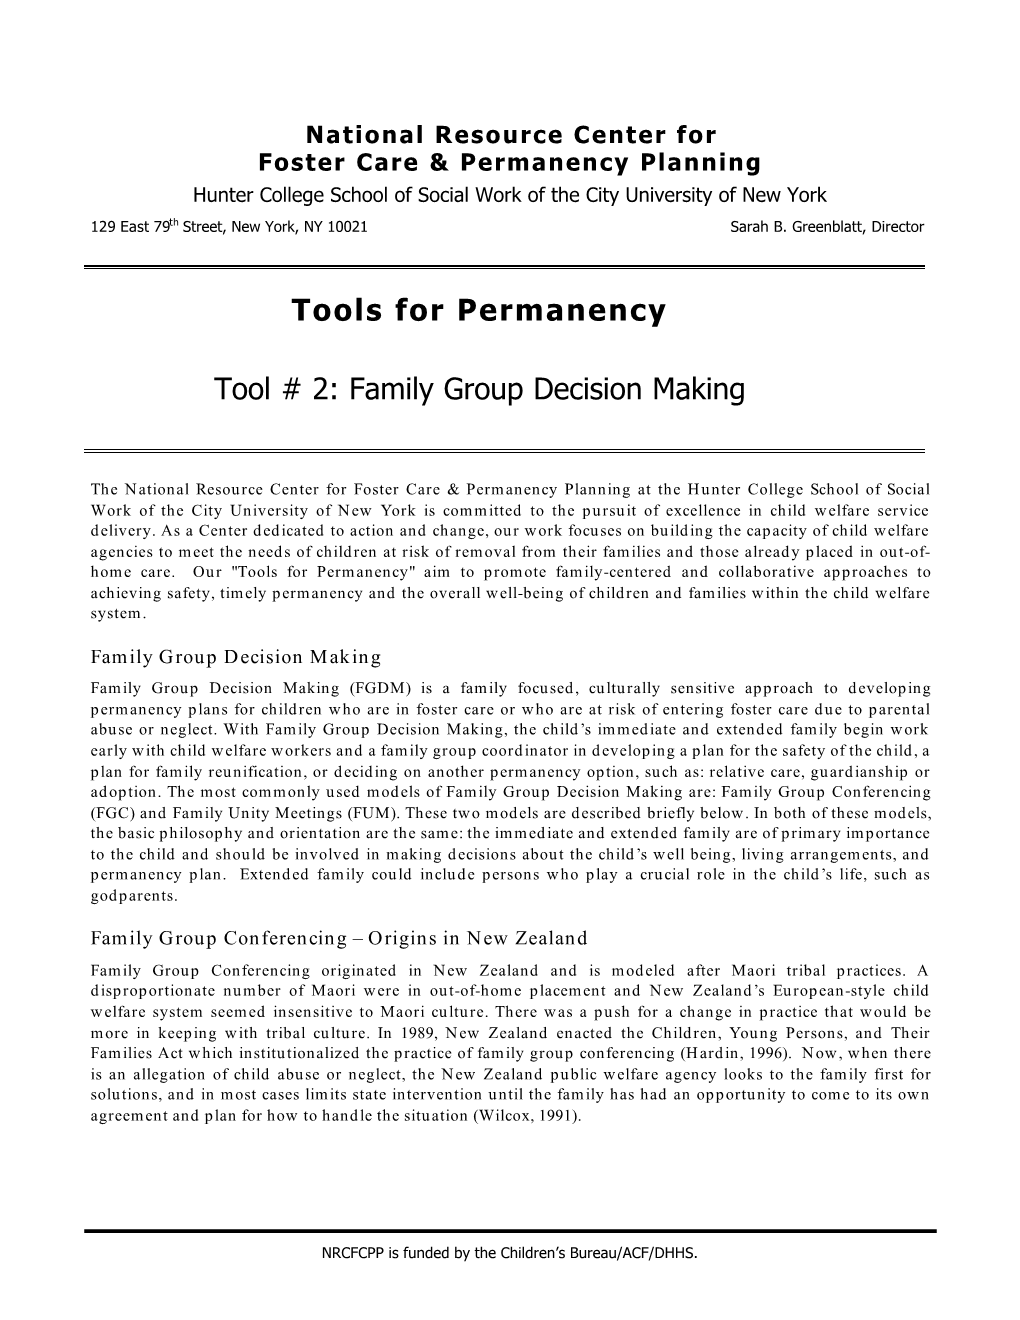 Tools for Permanency